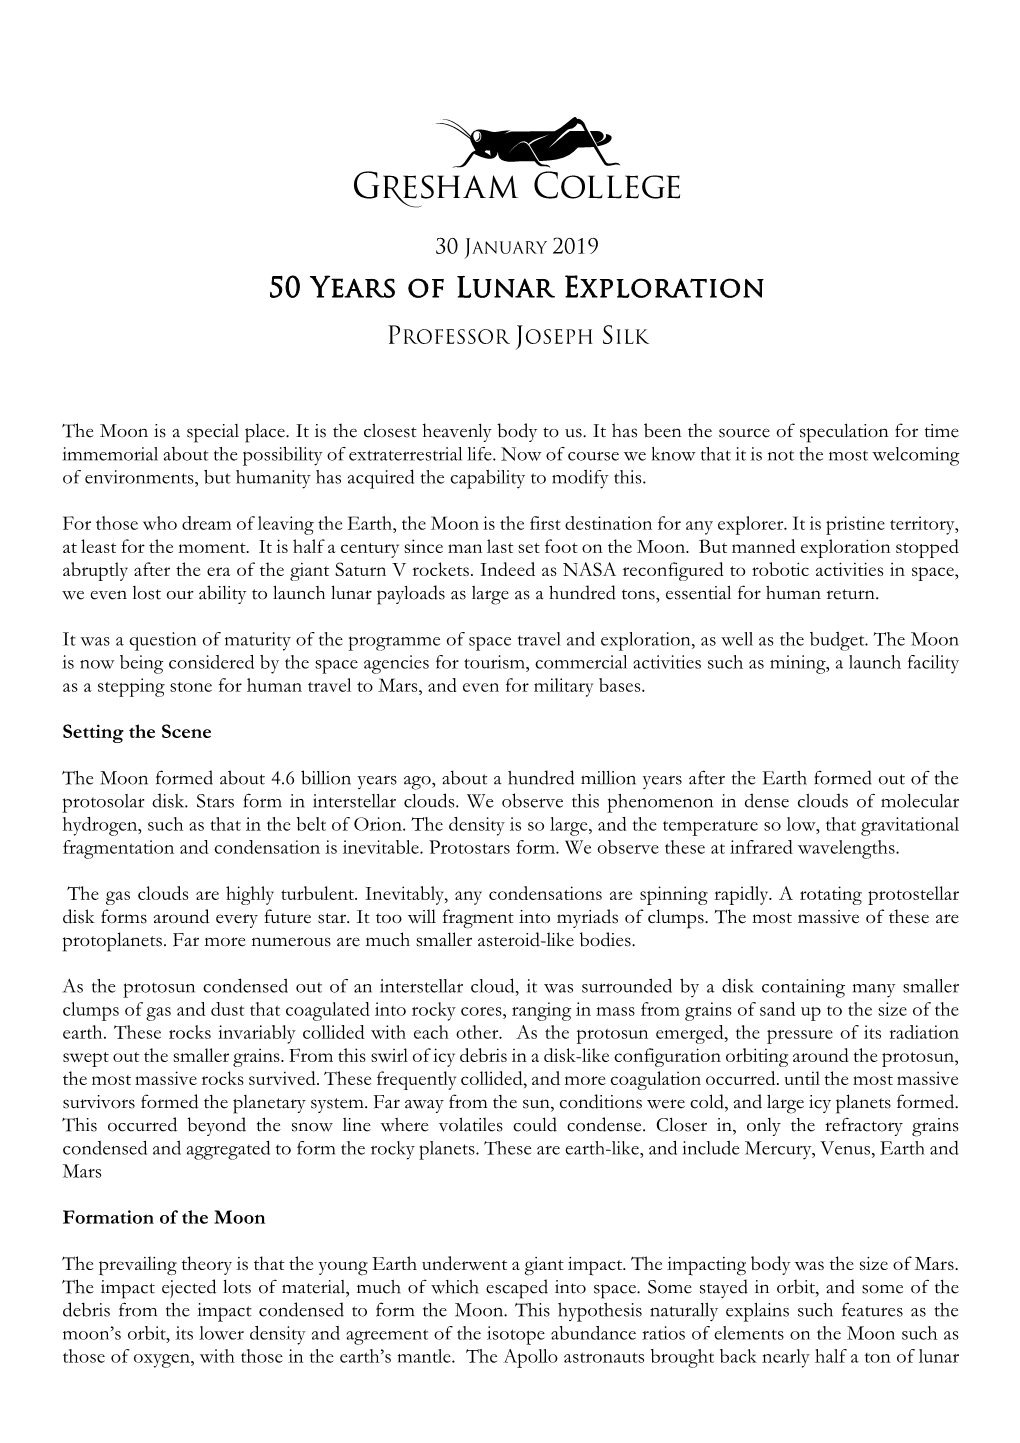 50 Years of Lunar Exploration